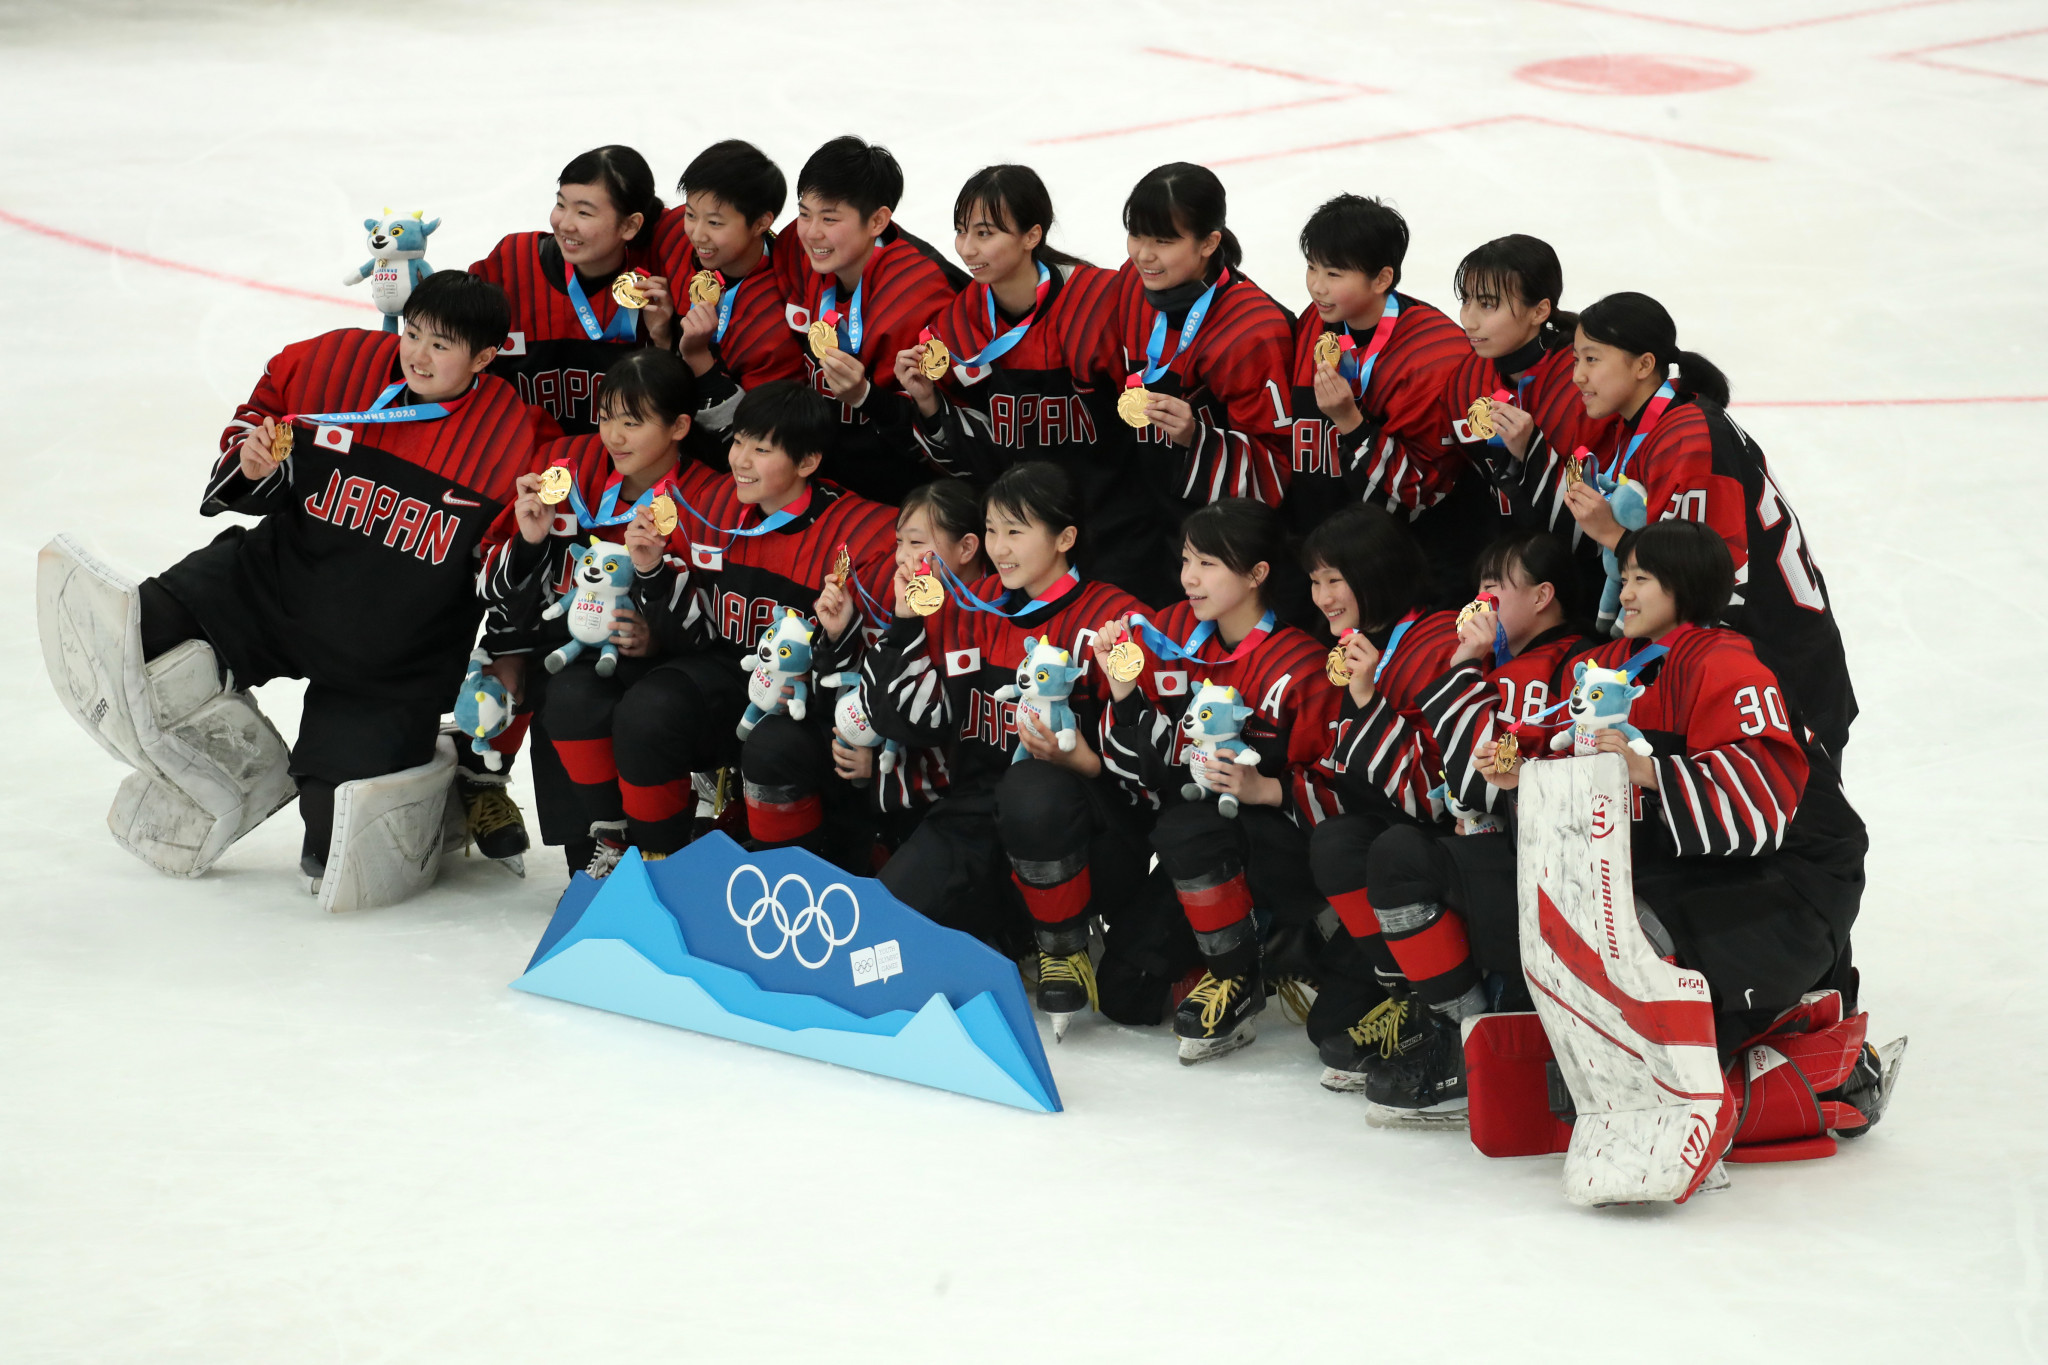 Japan triumphed in the women's ice hockey final at the Winter Youth Olympic Games in Lausanne ©Getty Images